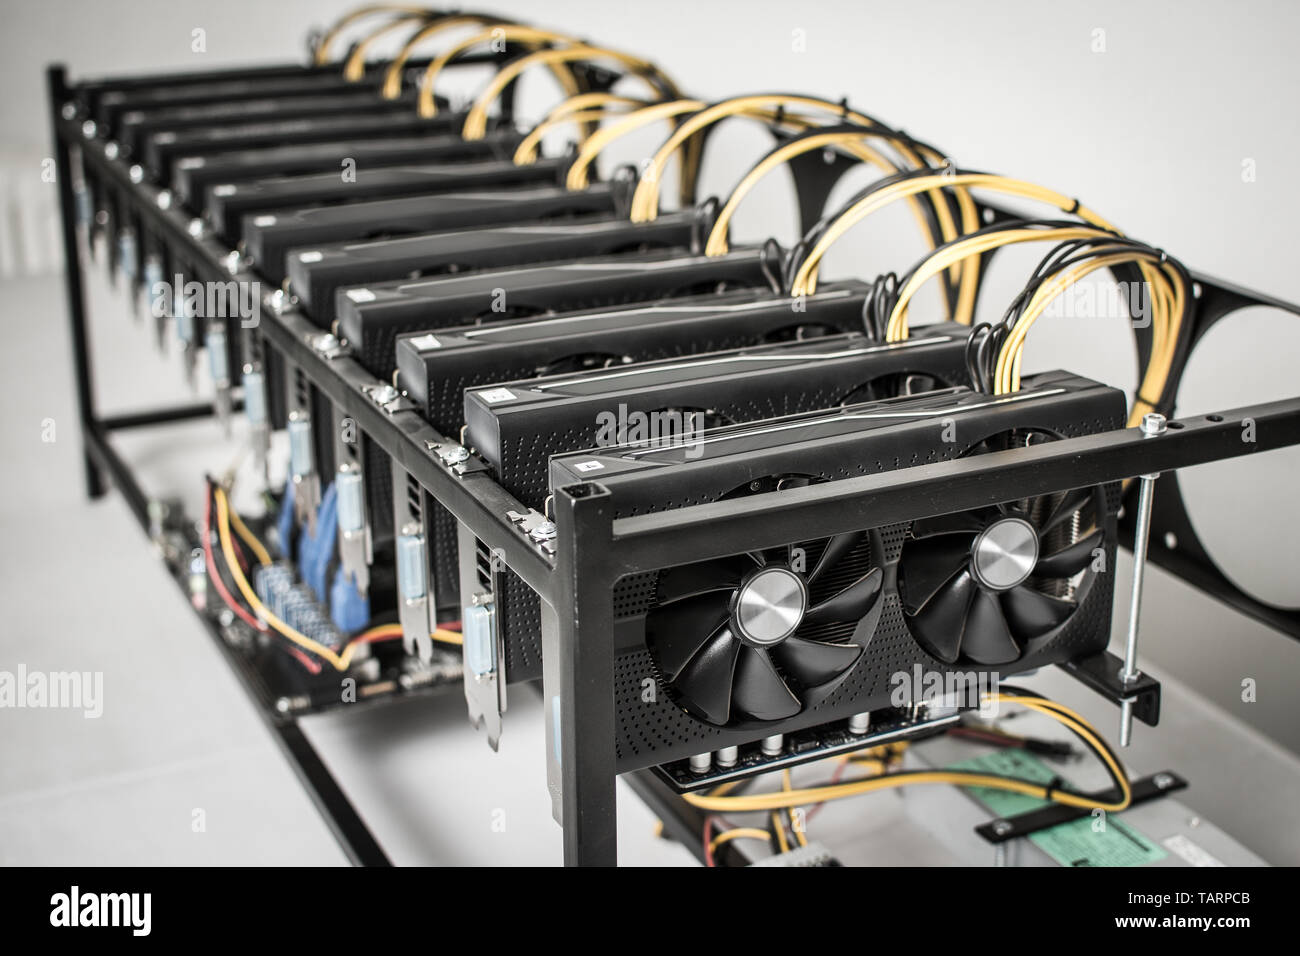 Mining Rig Machine for Cryptocurrency Using Powerful Computer Graphic Cards Stock Photo